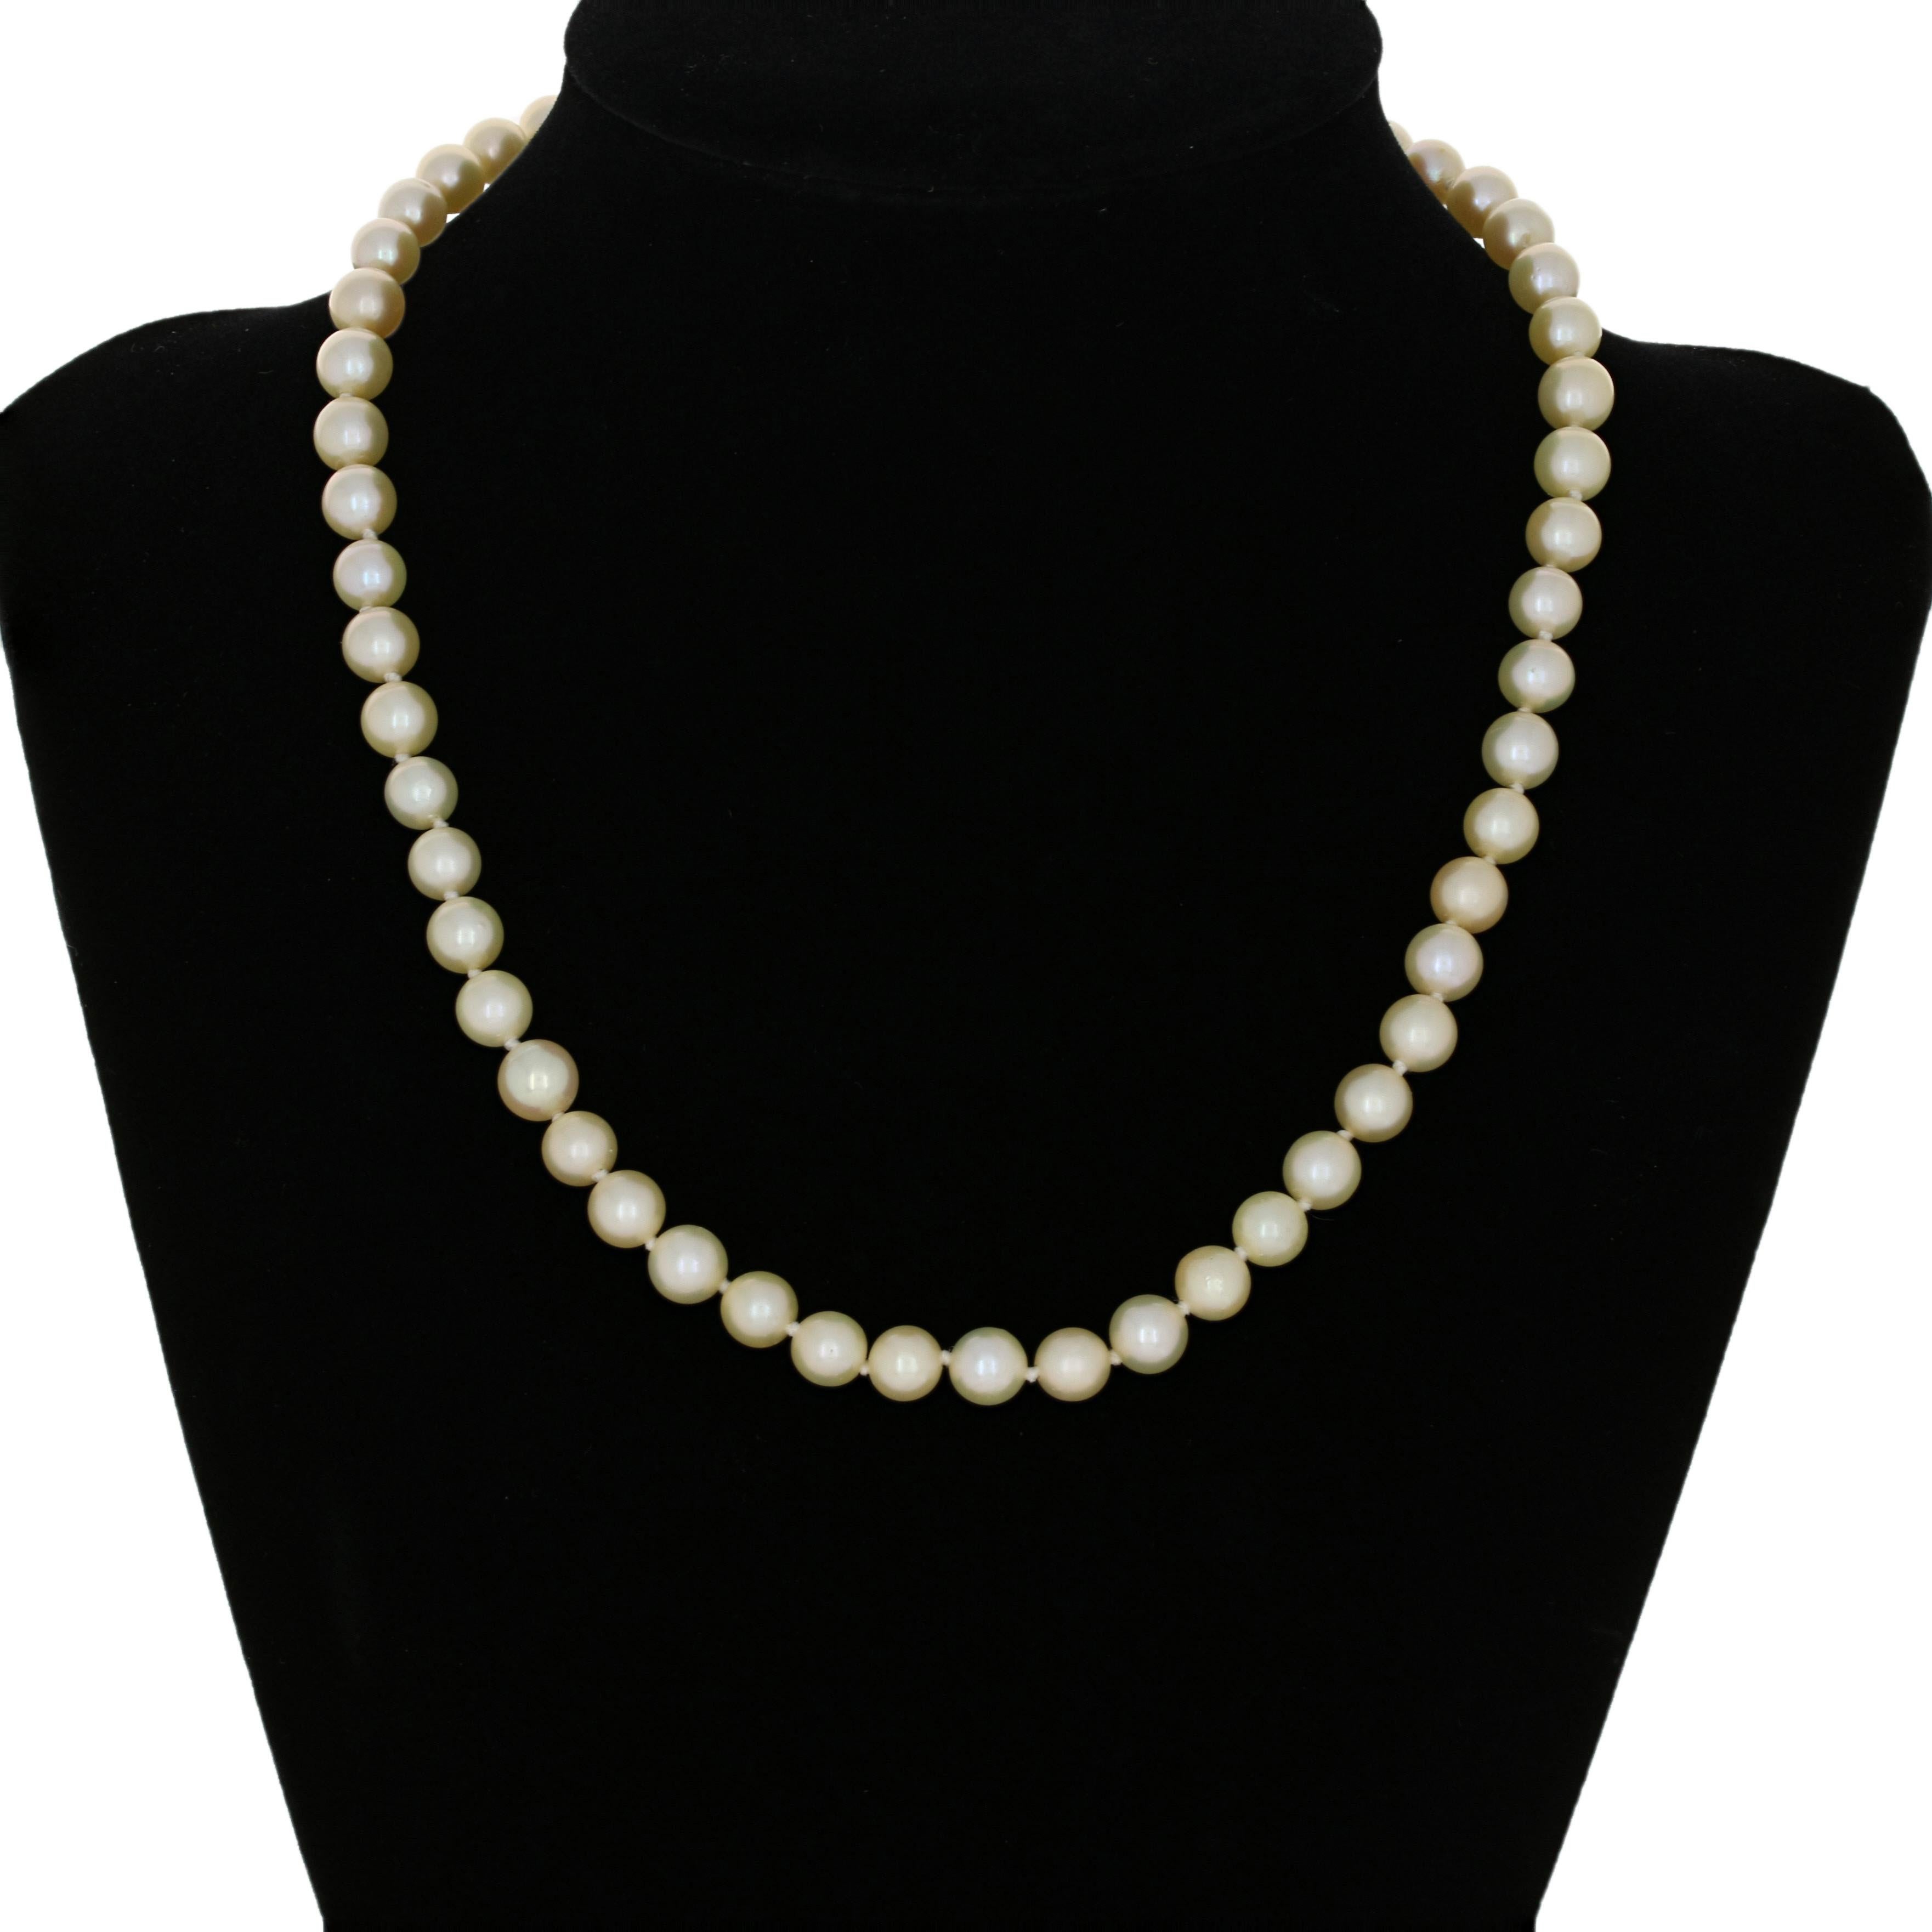 Timeless elegance defined! This necklace showcases luminous cultured pearls that have been freshly restrung on a durable knotted cord. Crafted in 18k white gold, the necklace's bow clasp is graced with a sparkling diamond and ornate milgrain work.  